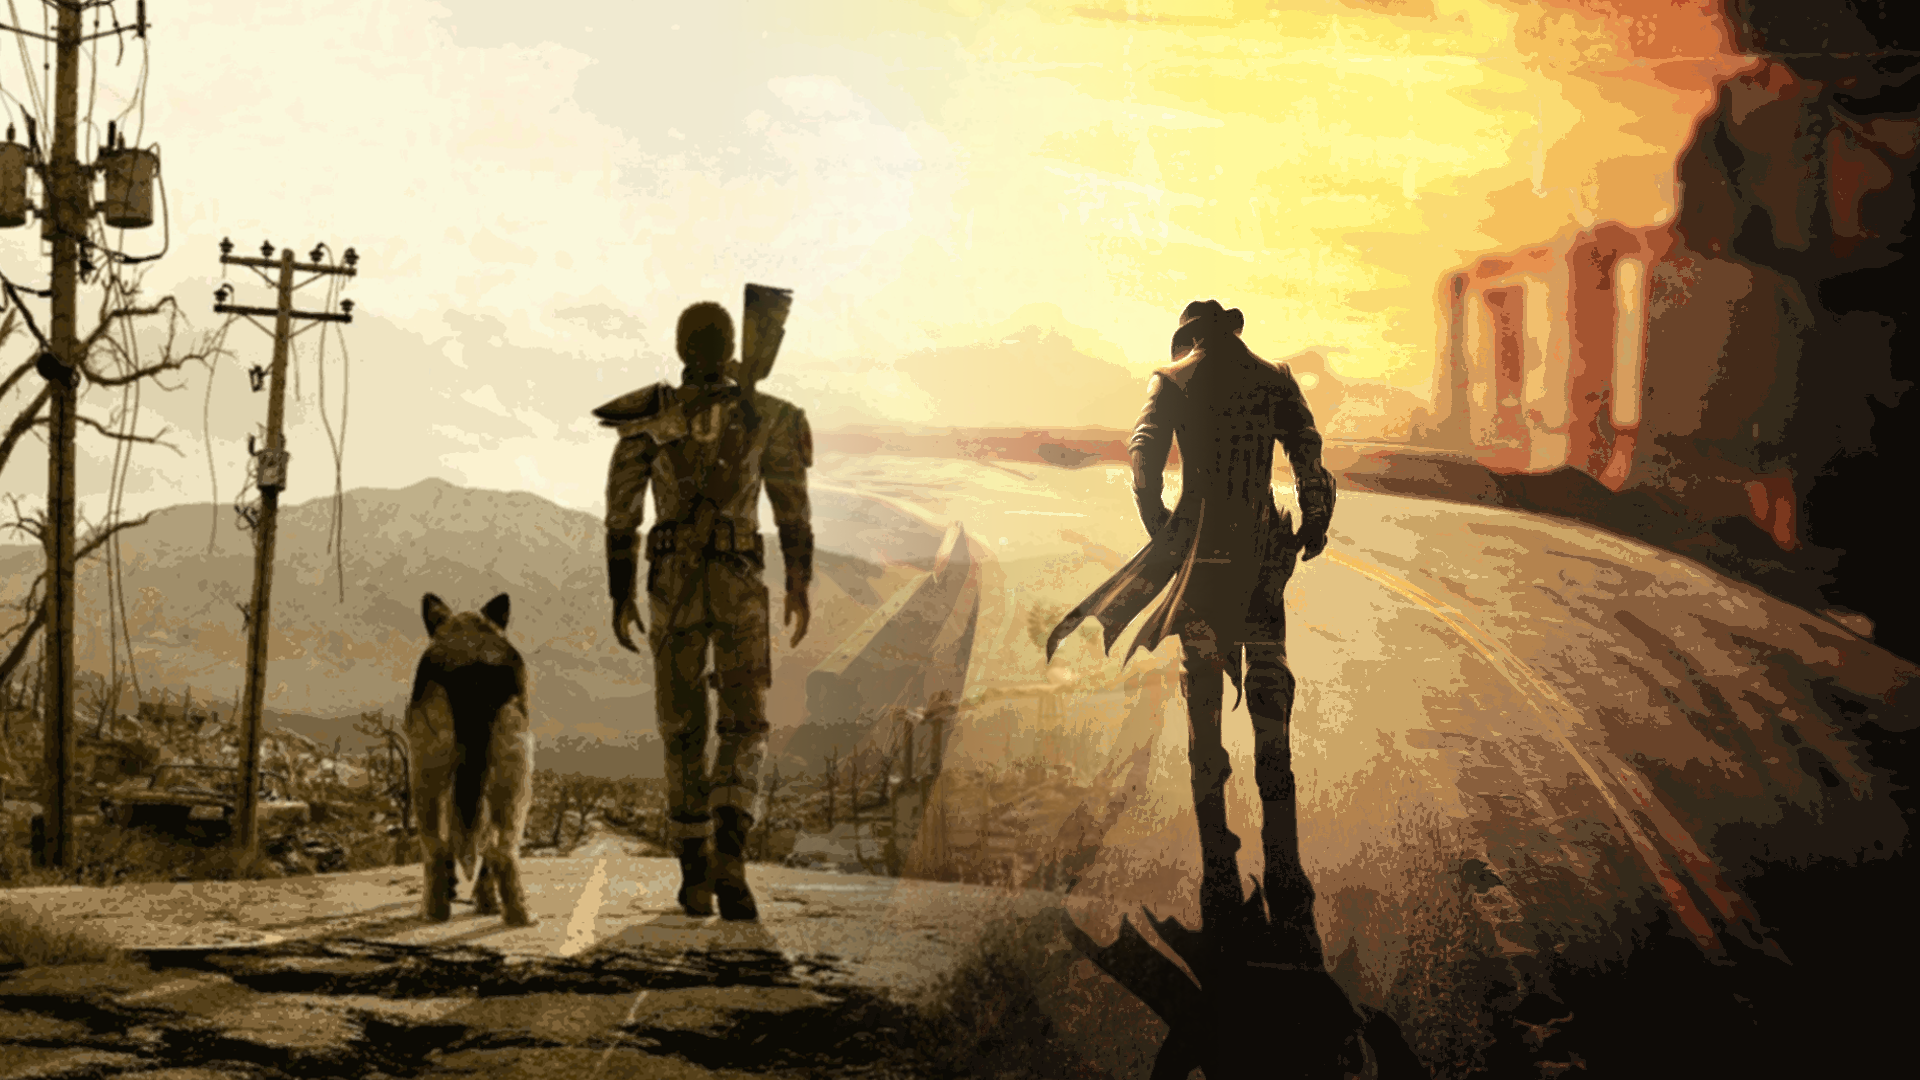 fallout tale of 2 wastelands requirement